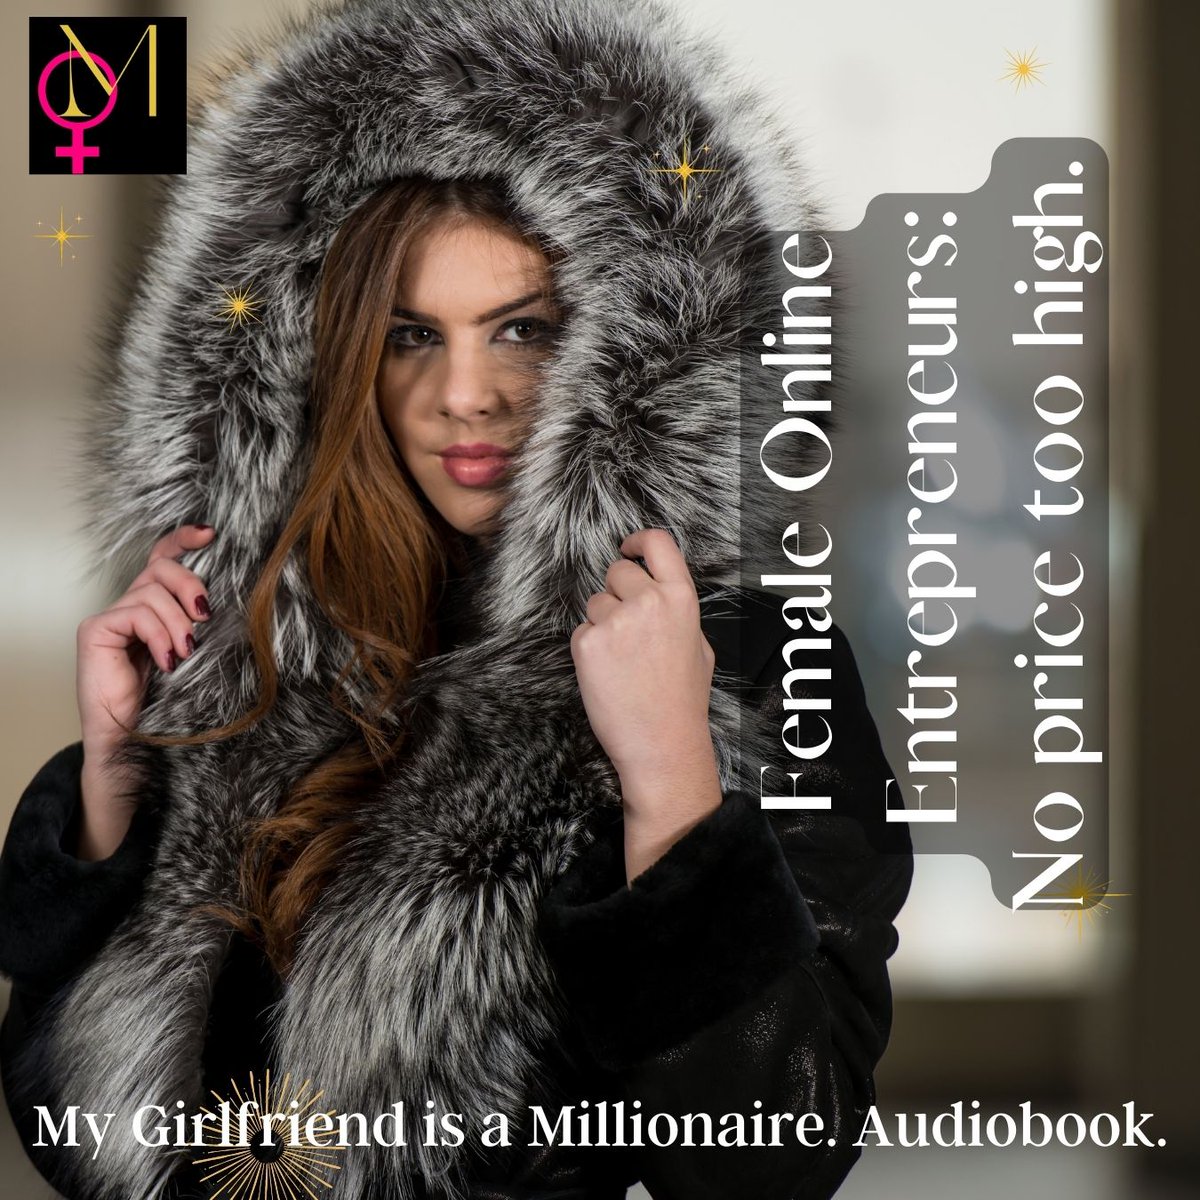 Female #OnlineEntrepreneurs: #Nopricetoohigh! #Getrichyoung  as a lifestyle. And this #lovebook is for you, guys and girls:     bit.ly/3n29kbo